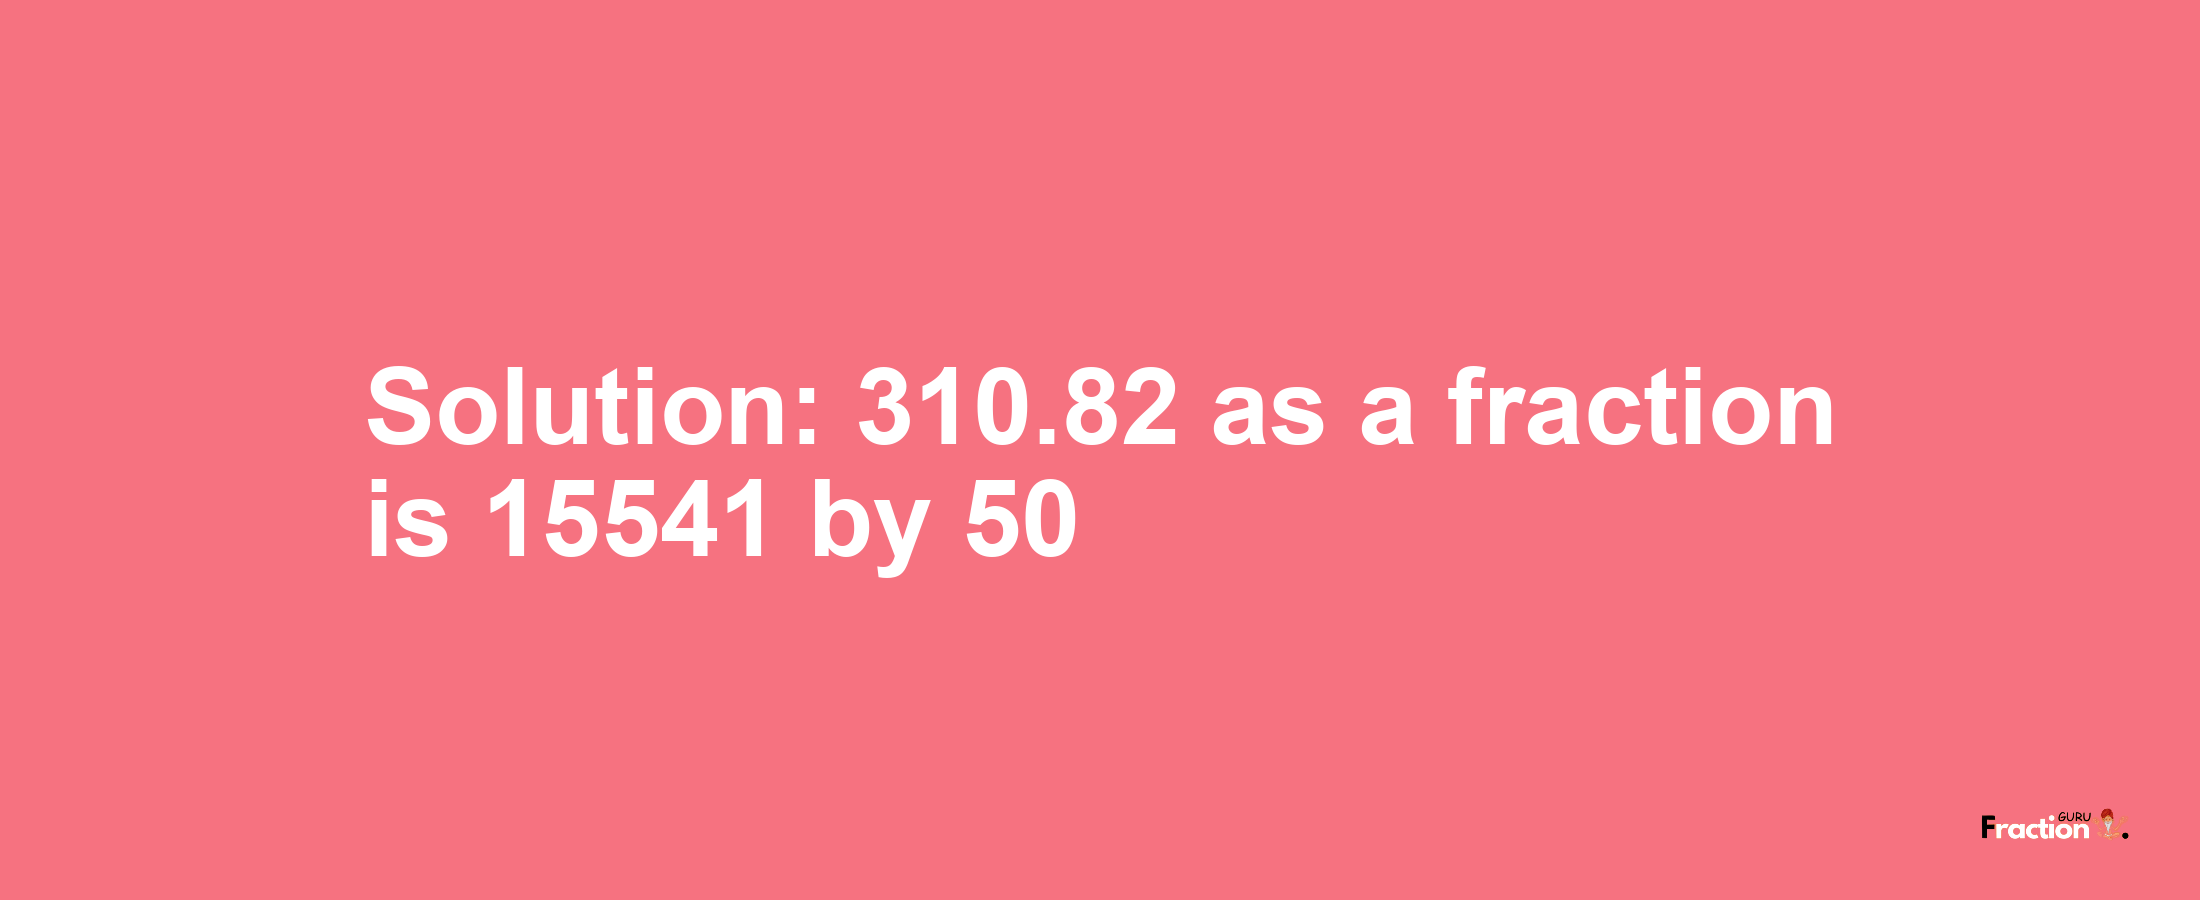 Solution:310.82 as a fraction is 15541/50